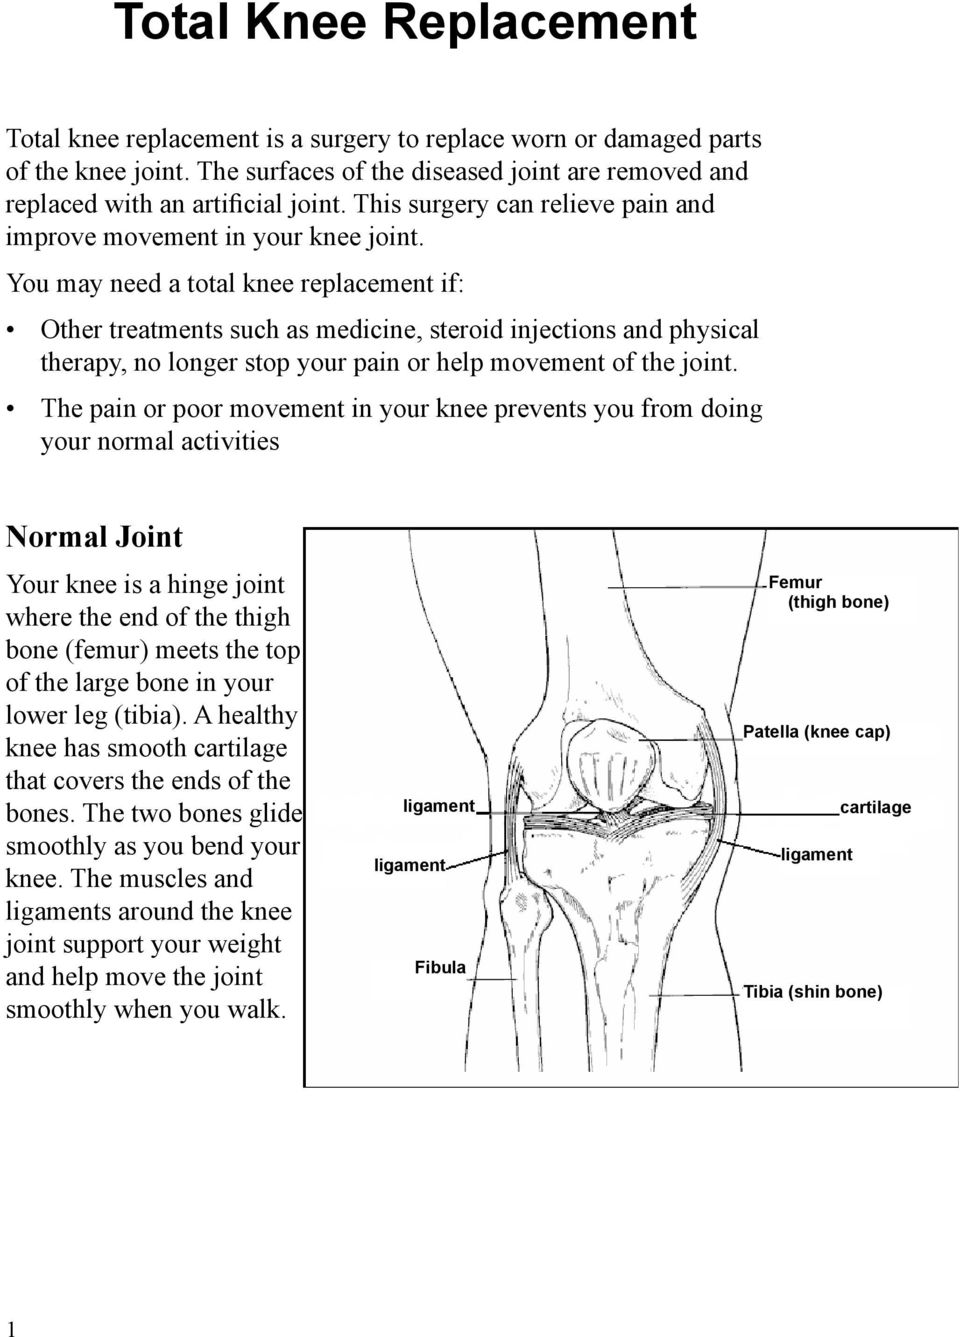 You may need a total knee replacement if: Other treatments such as medicine, steroid injections and physical therapy, no longer stop your pain or help movement of the joint.